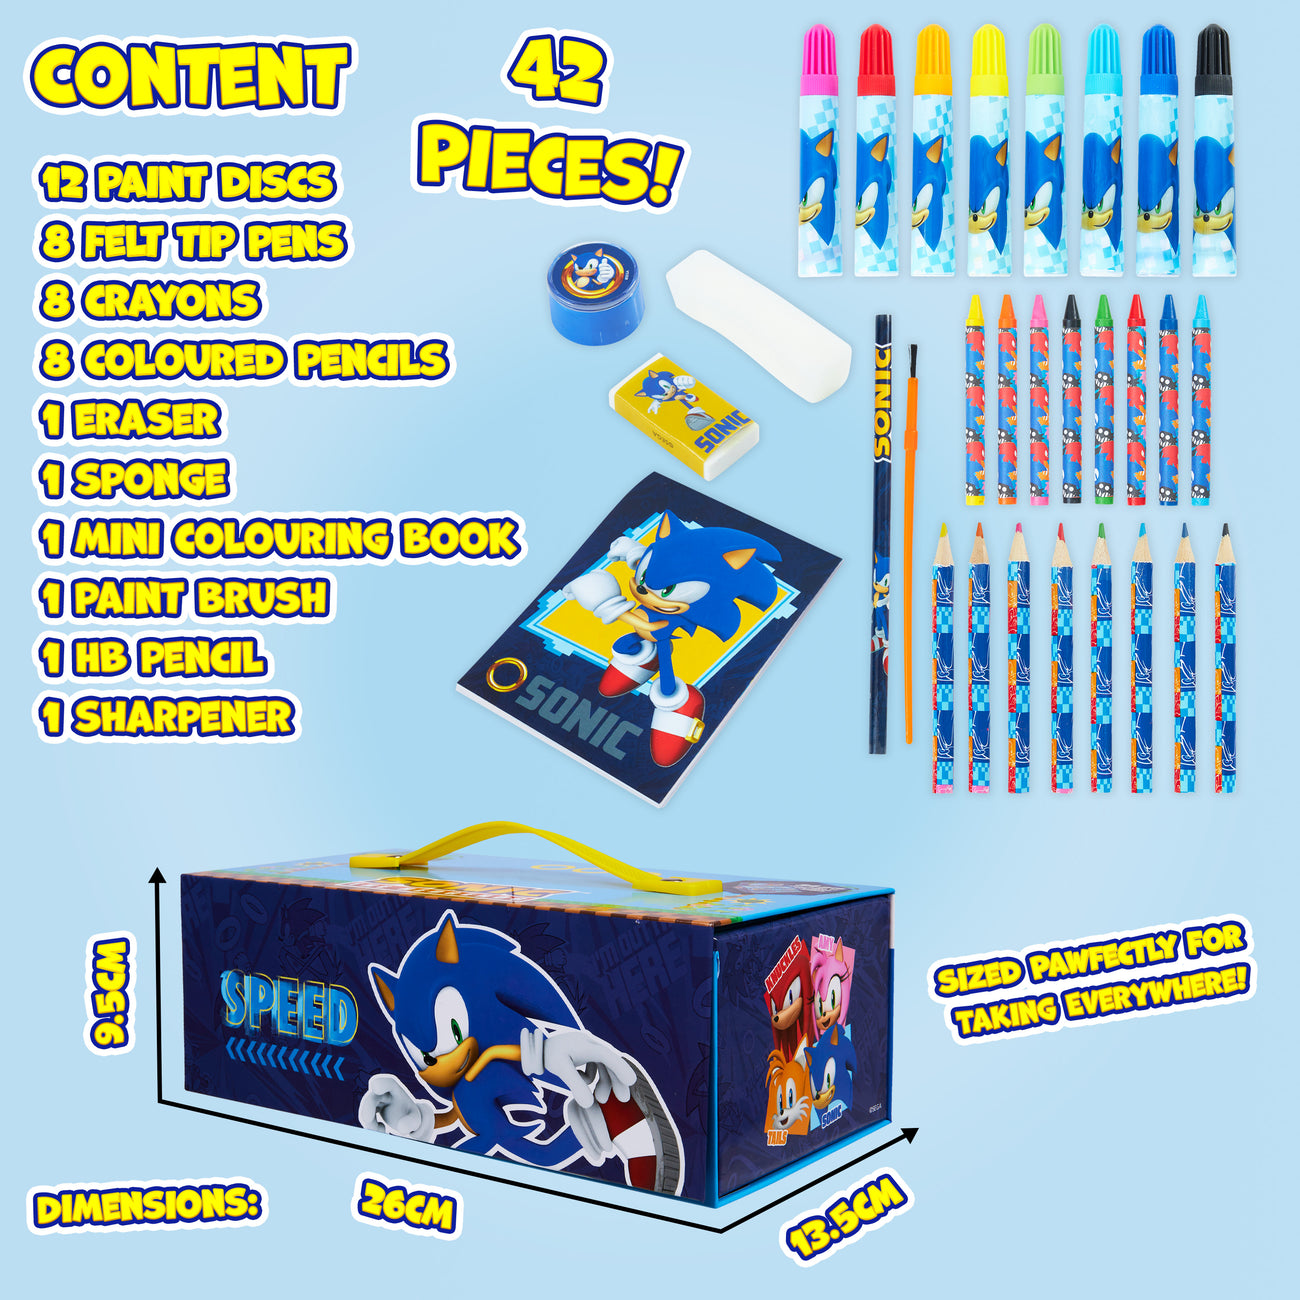 Sonic the Hedgehog Drawing and Painting Set for Boys - Bundle with Sonic  Coloring Book, Coloring Utensils, Watercolor Paints, Stickers, and More